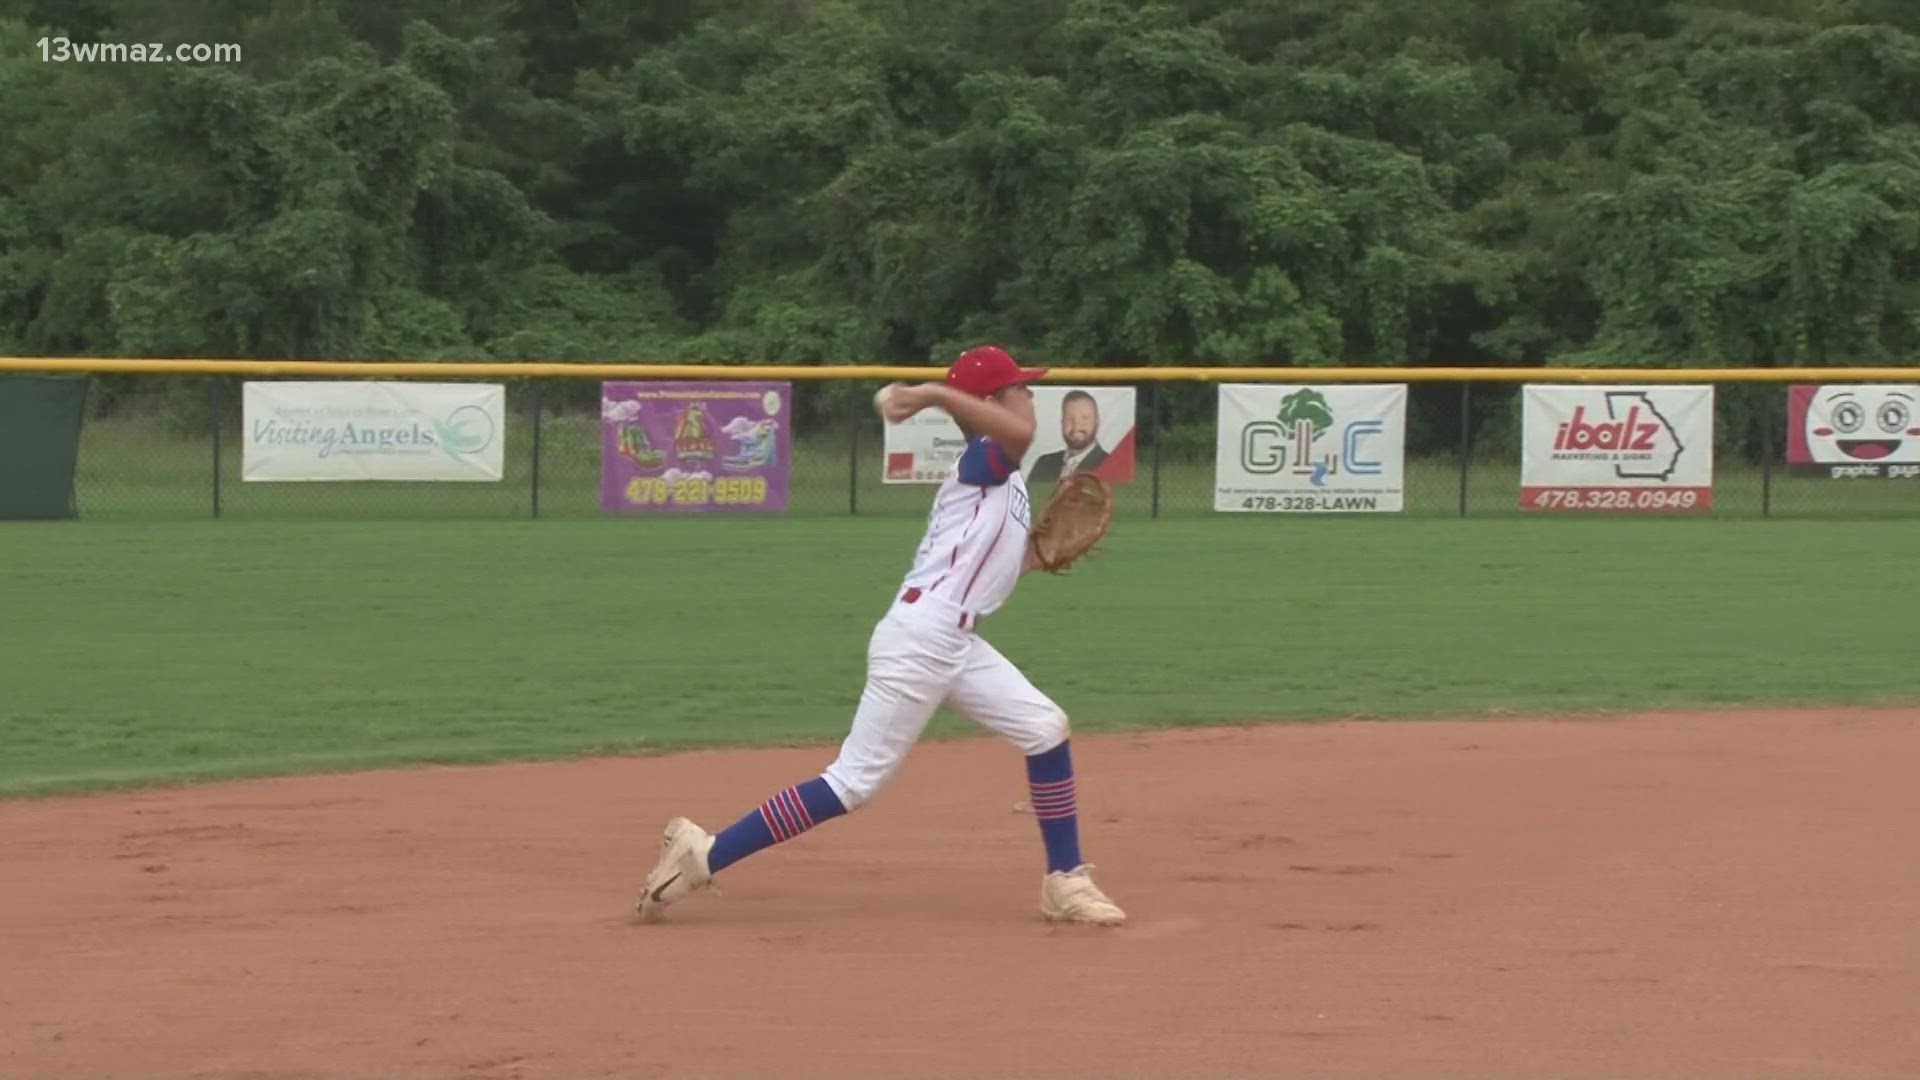 Warner Robins little league team is heading to state playoffs